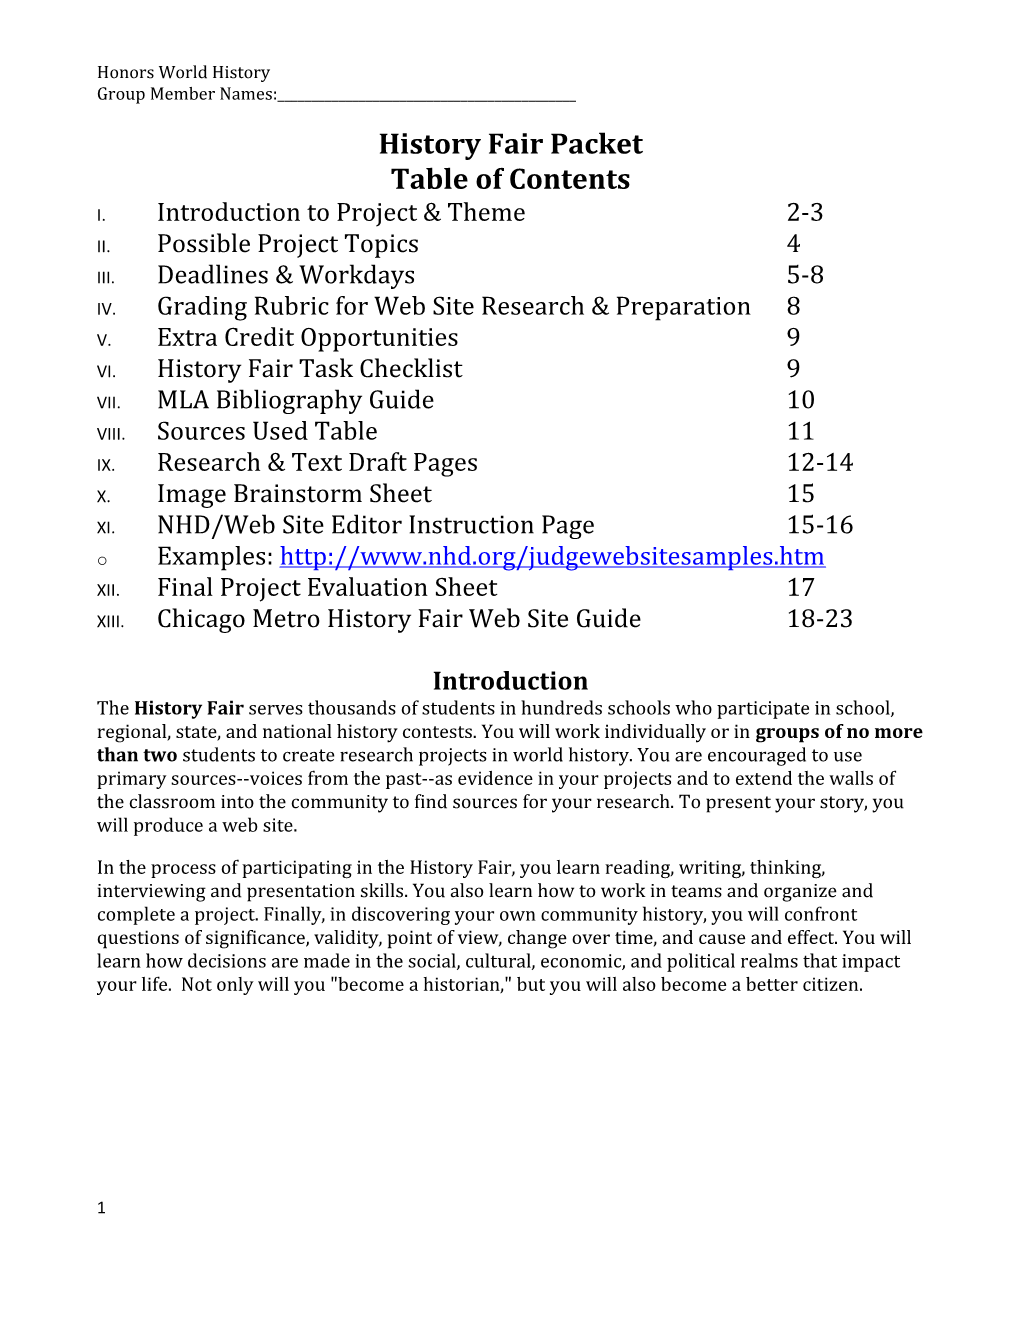 Table of Contents s17